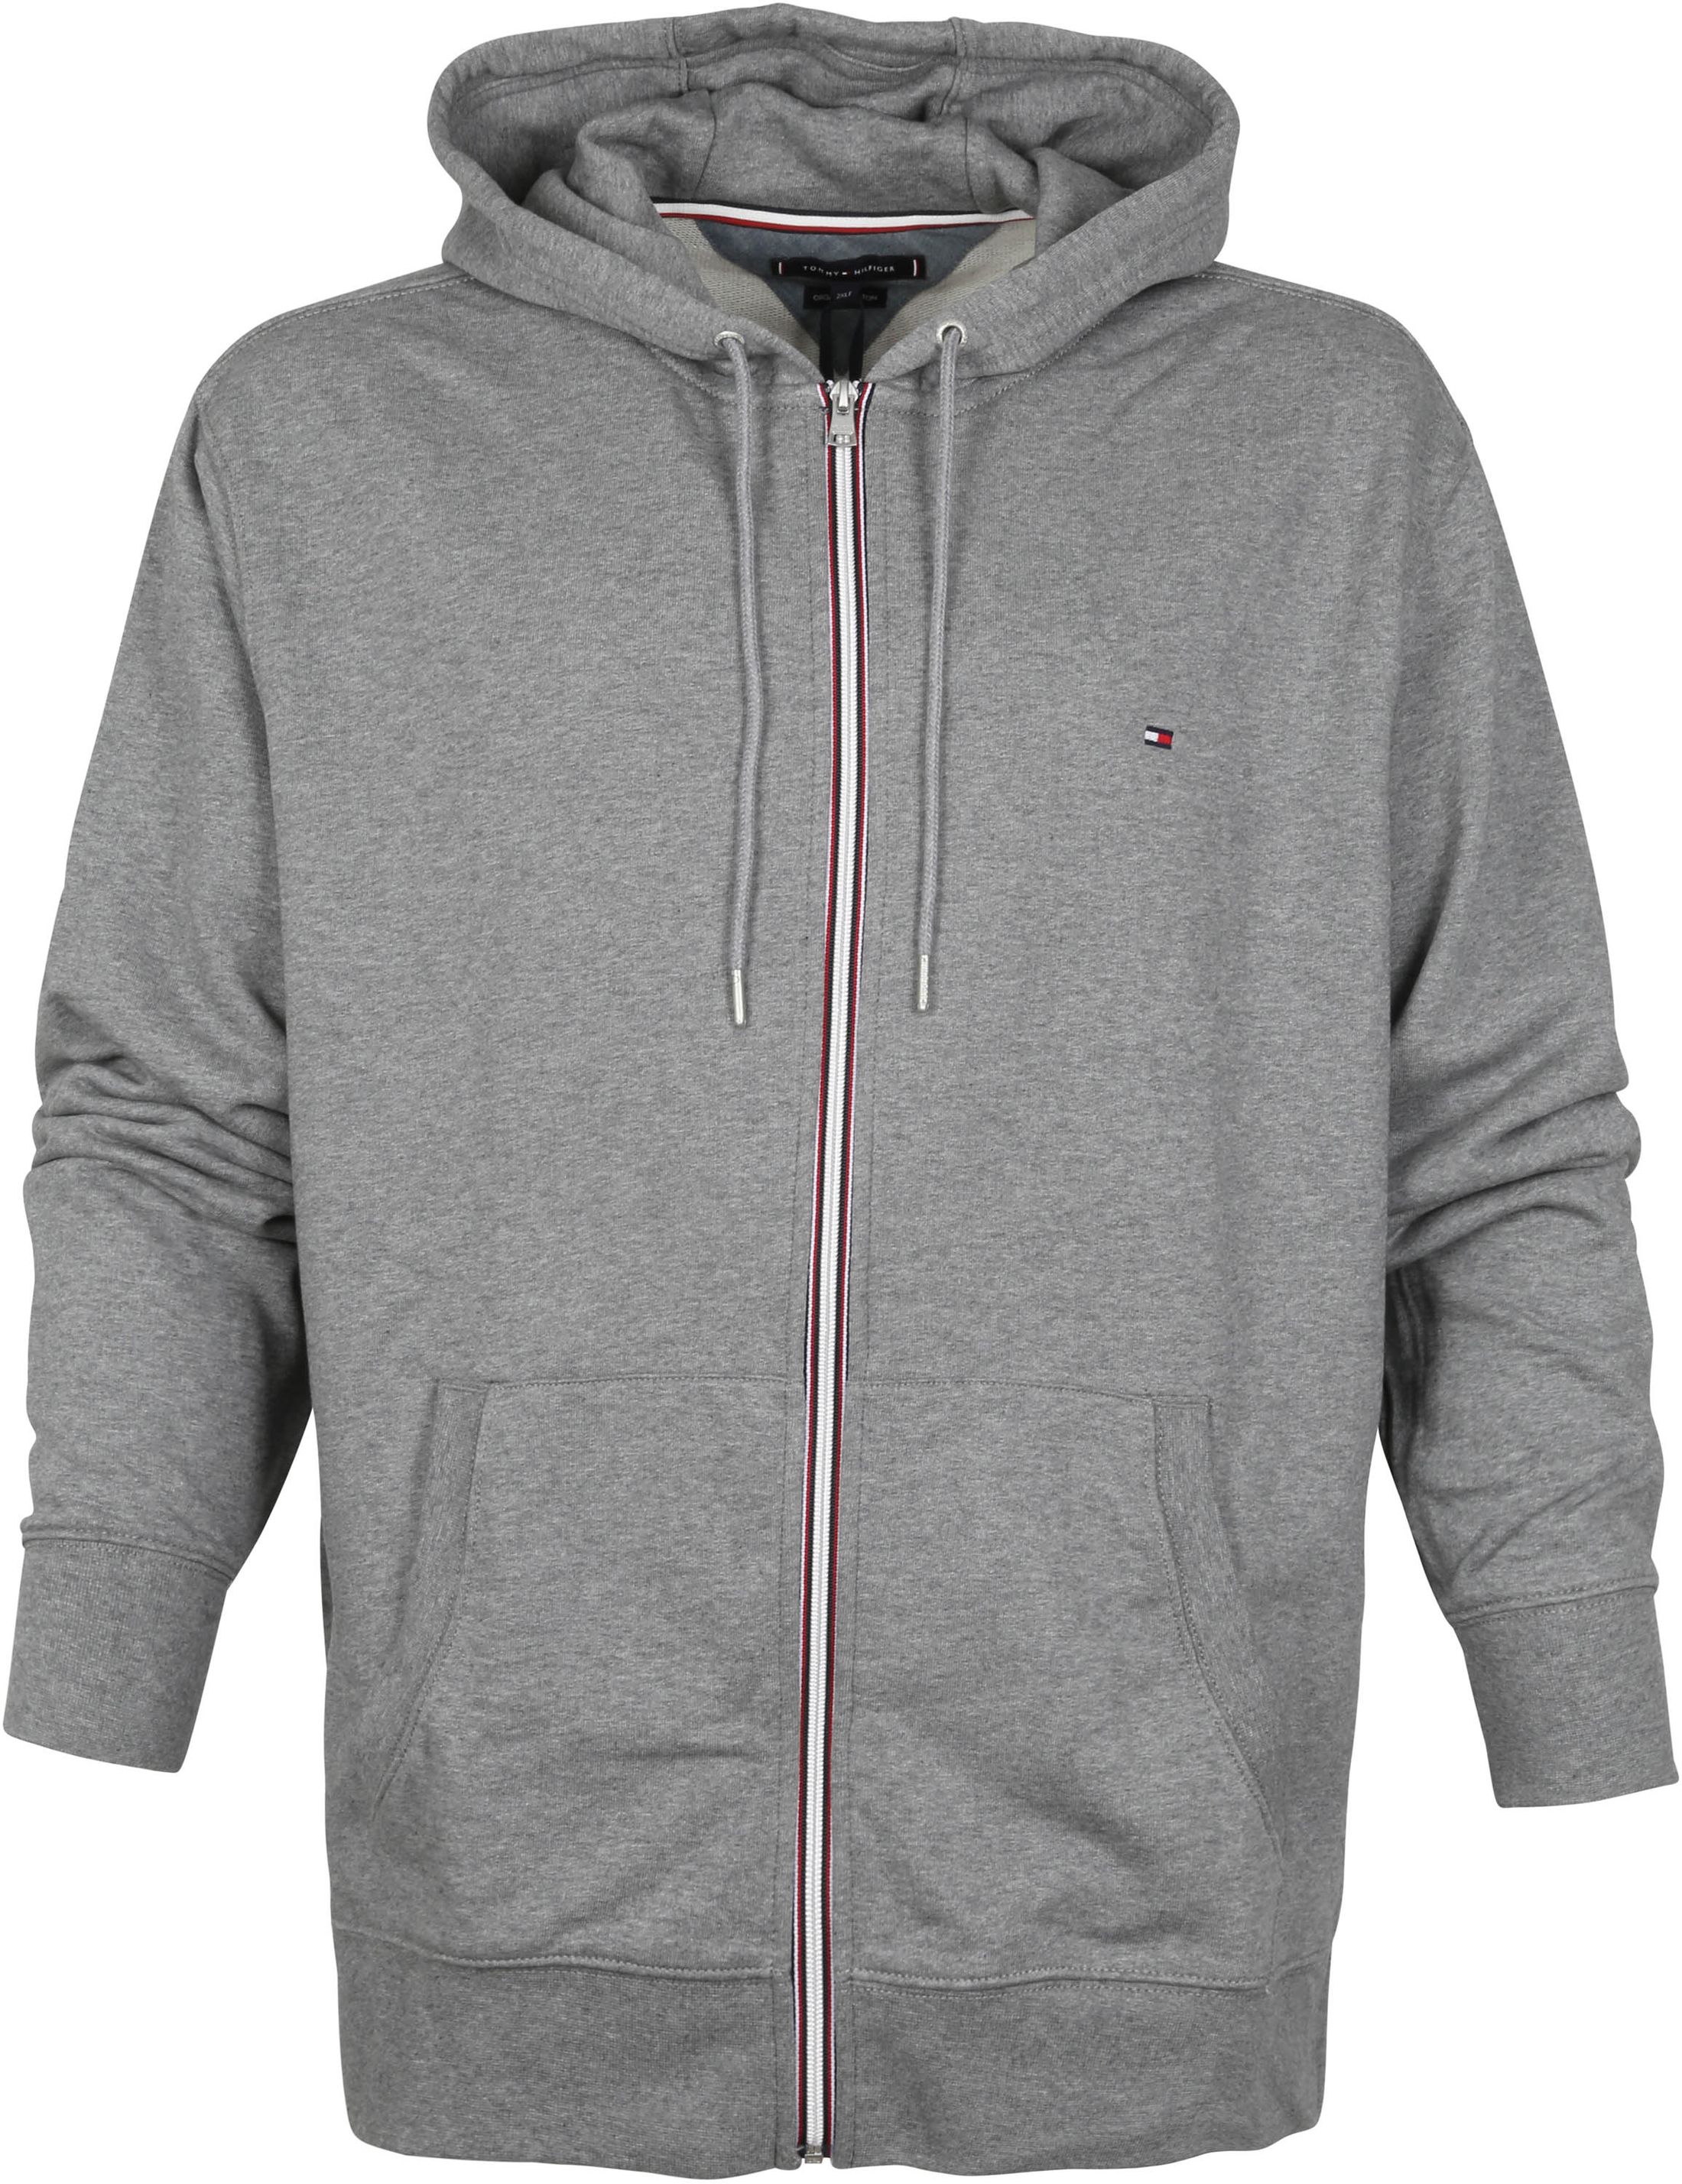 Tommy Hilfiger Big and Tall Zip Hoodie Grey size 3XL